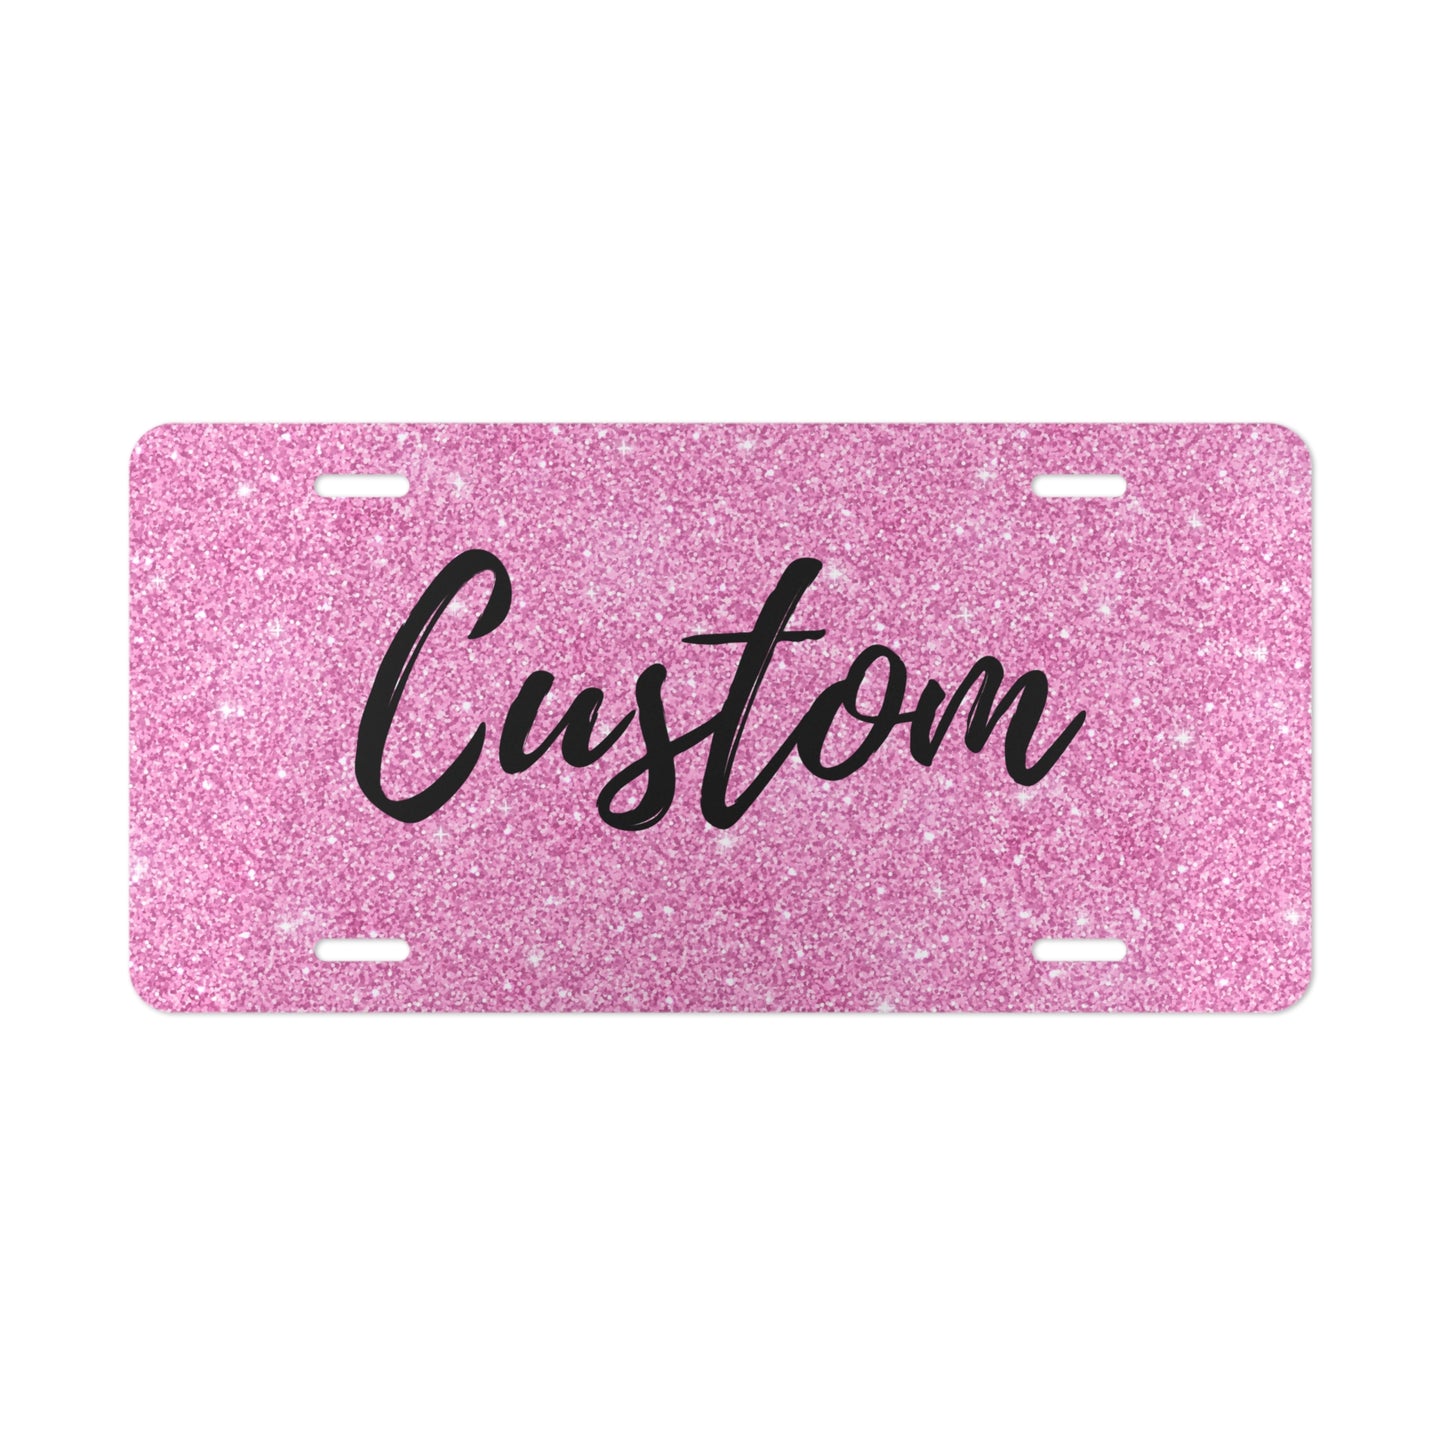 car plate, car tag, car vanity, custom, front of car, license, license plate, made to order, name license, personalized, personalized license, personalized plate, plate, bride sweatshirt, bachelorette gift, bridal gift, bridal shower gift, bride to be sweater, custom bride gift, custom bride sweater, custom mrs shirt, engagement gift, future mrs sweater, gift idea for her, just married gift, new mrs gift